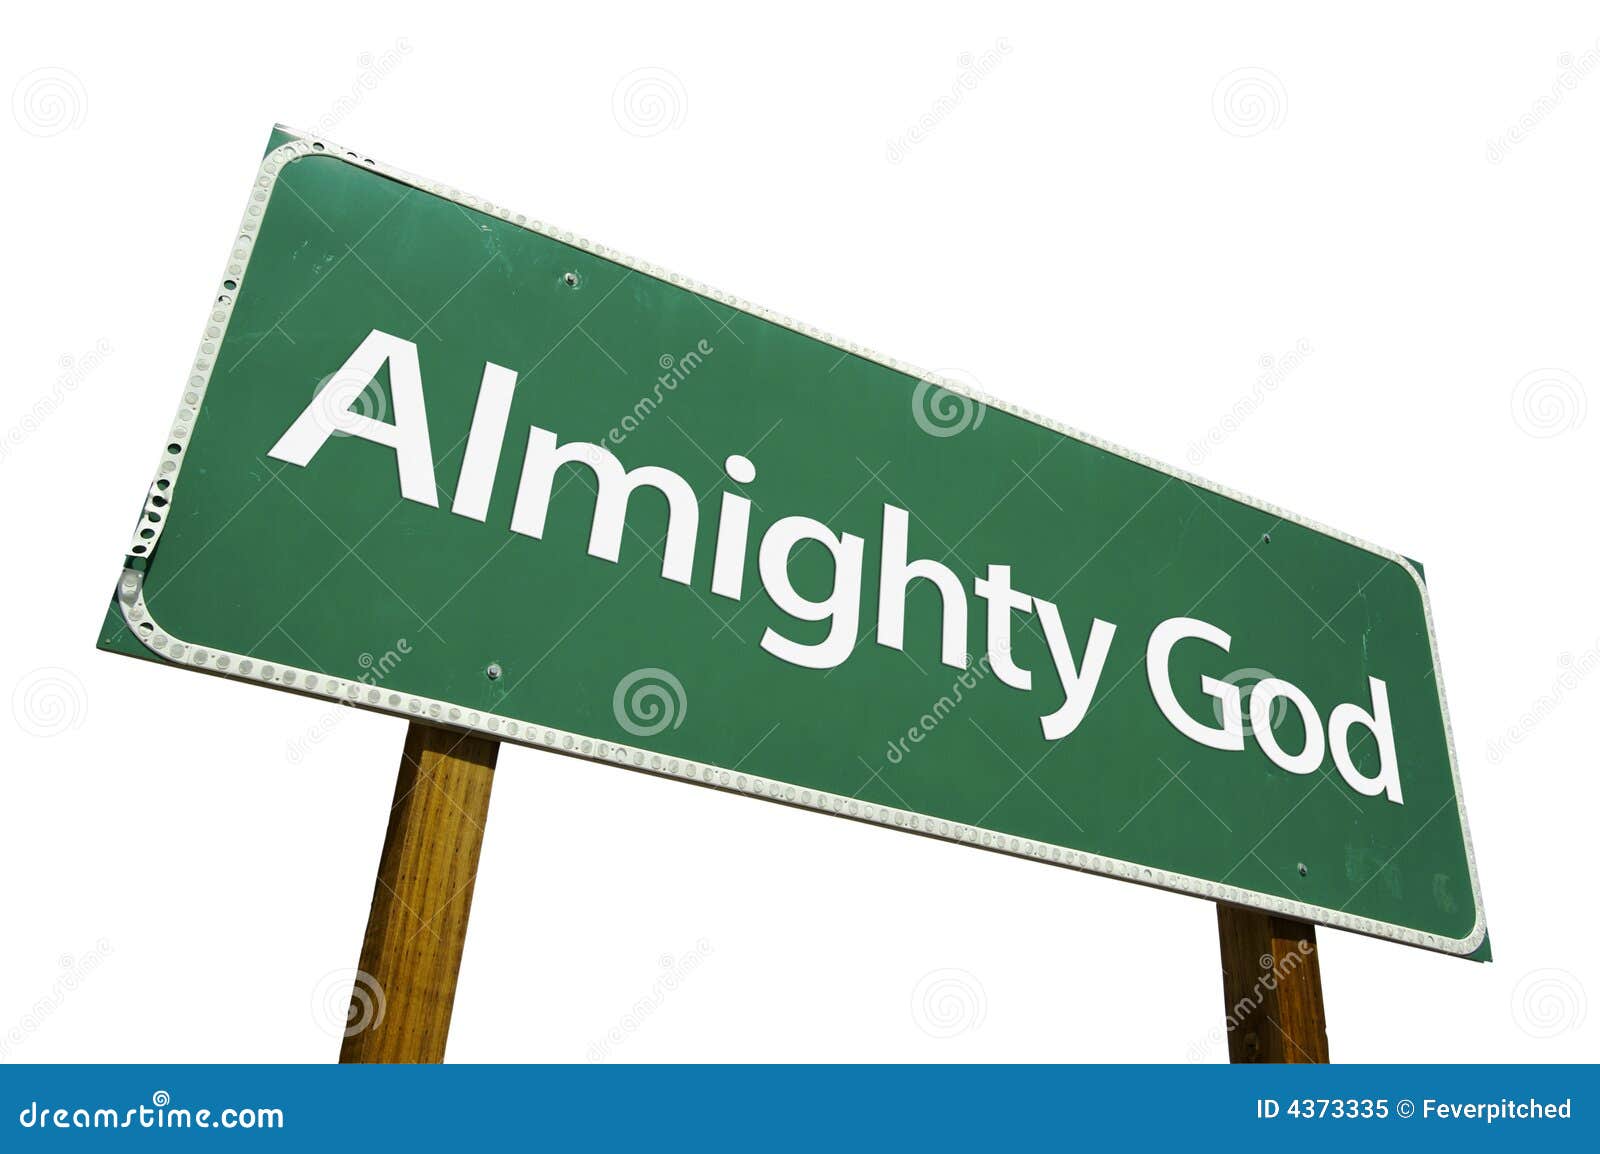 almighty god road sign